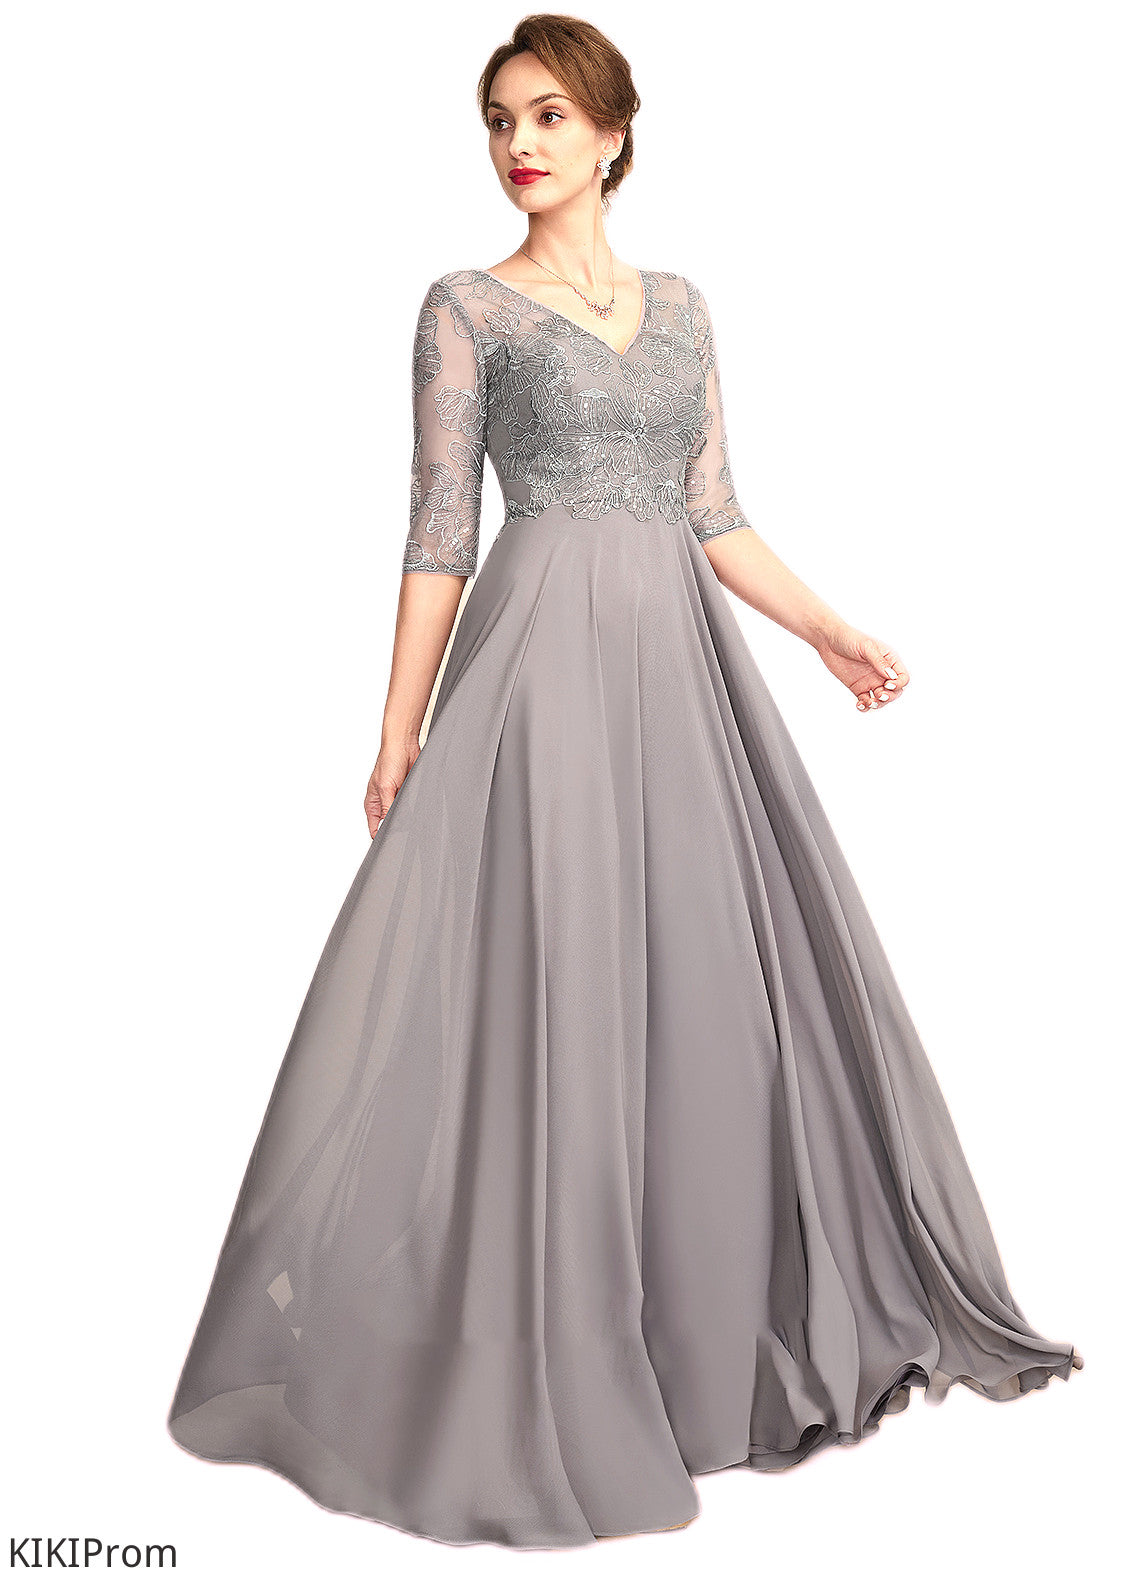 Camila A-Line V-neck Floor-Length Chiffon Lace Mother of the Bride Dress With Sequins DZ126P0014999